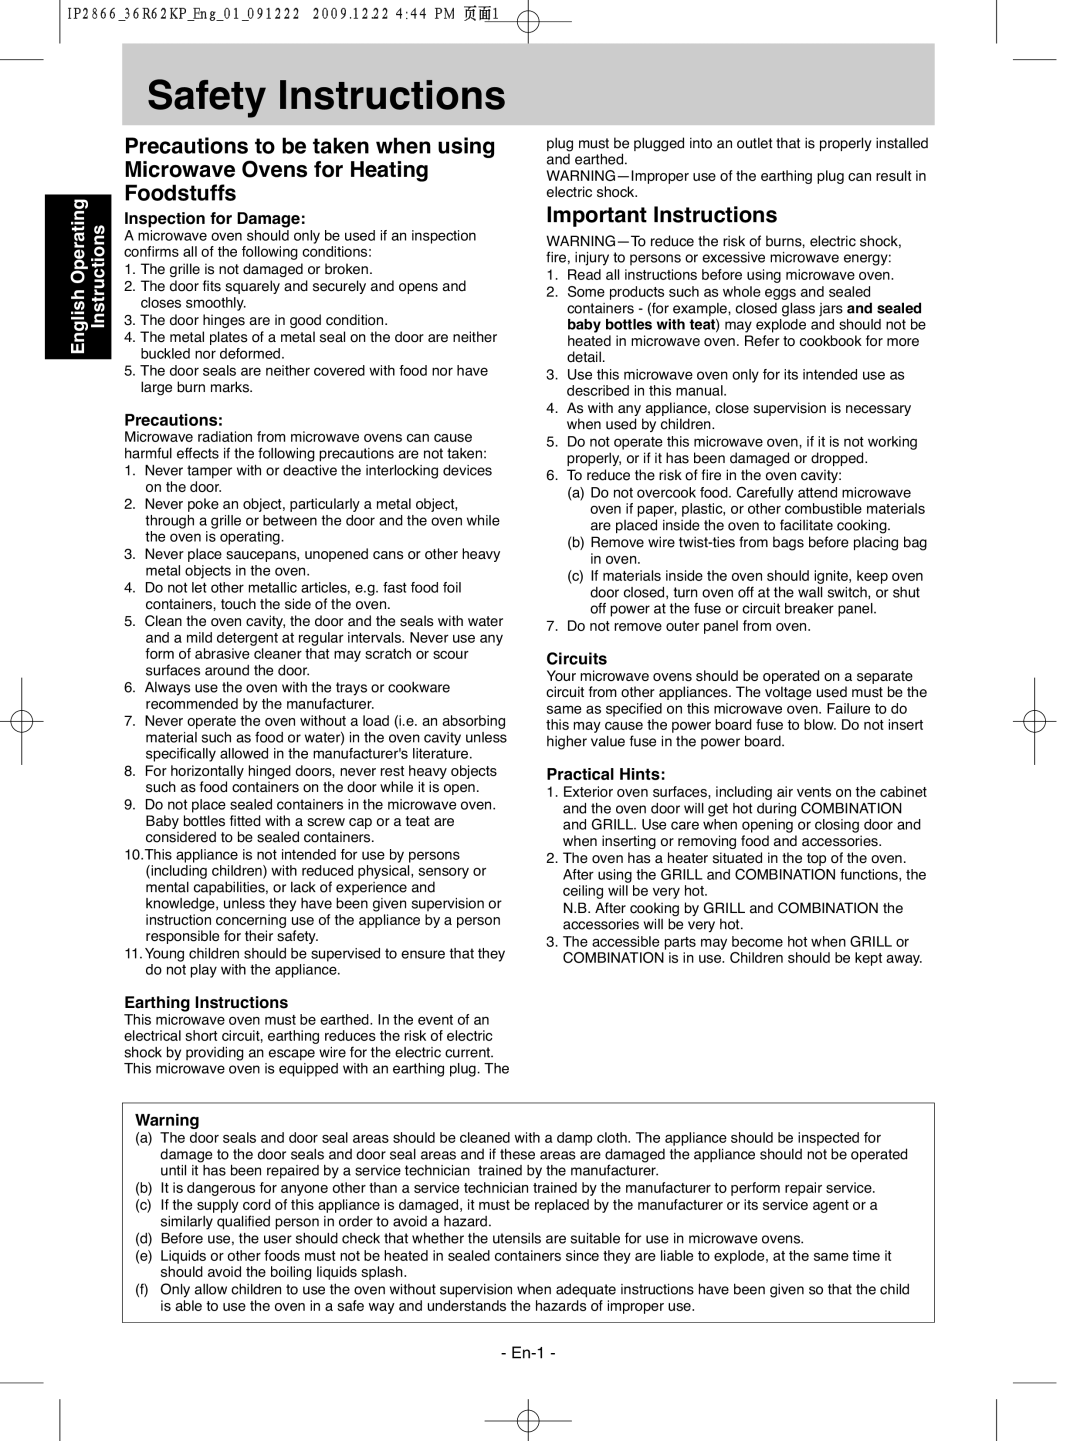 Panasonic NN-G335WF Safety Instructions, Important Instructions, English Operating, Inspection for Damage, Precautions 